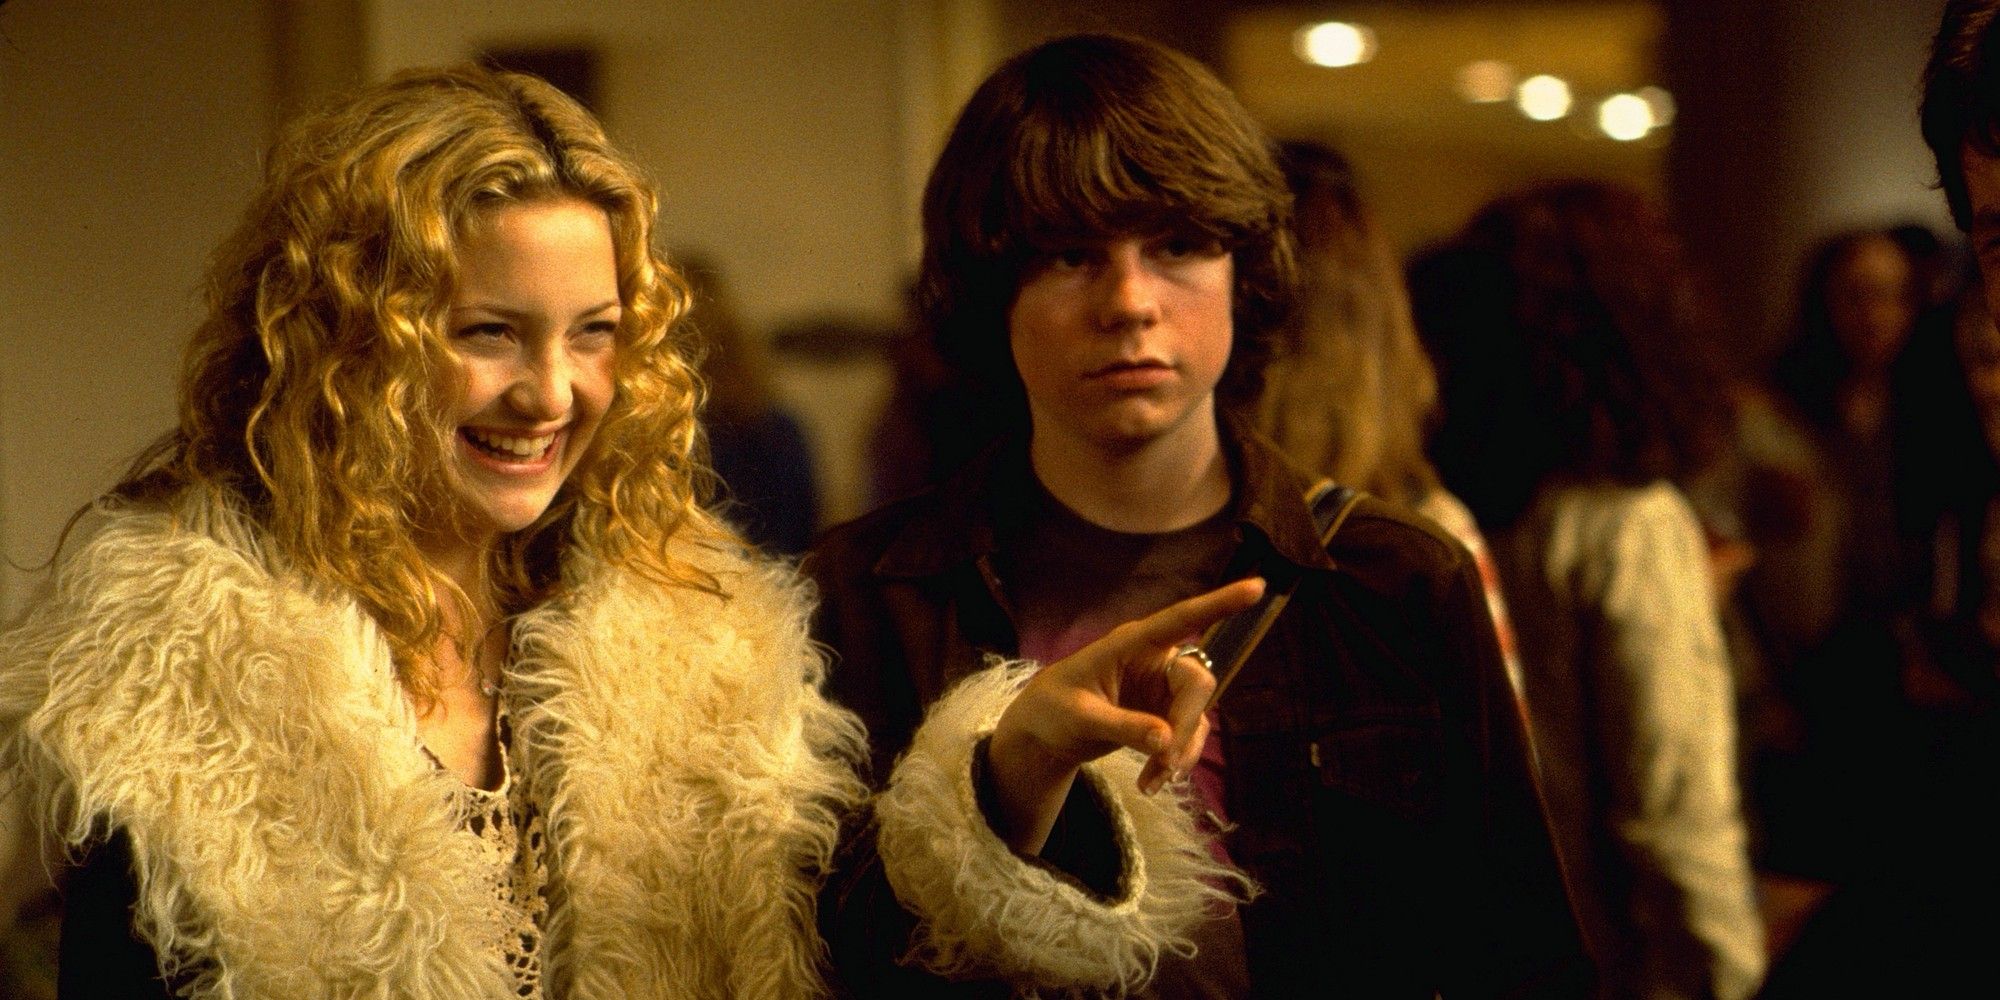 Kate Hudson pointing at something and smiling beside Patrick Fugit in Almost Famous